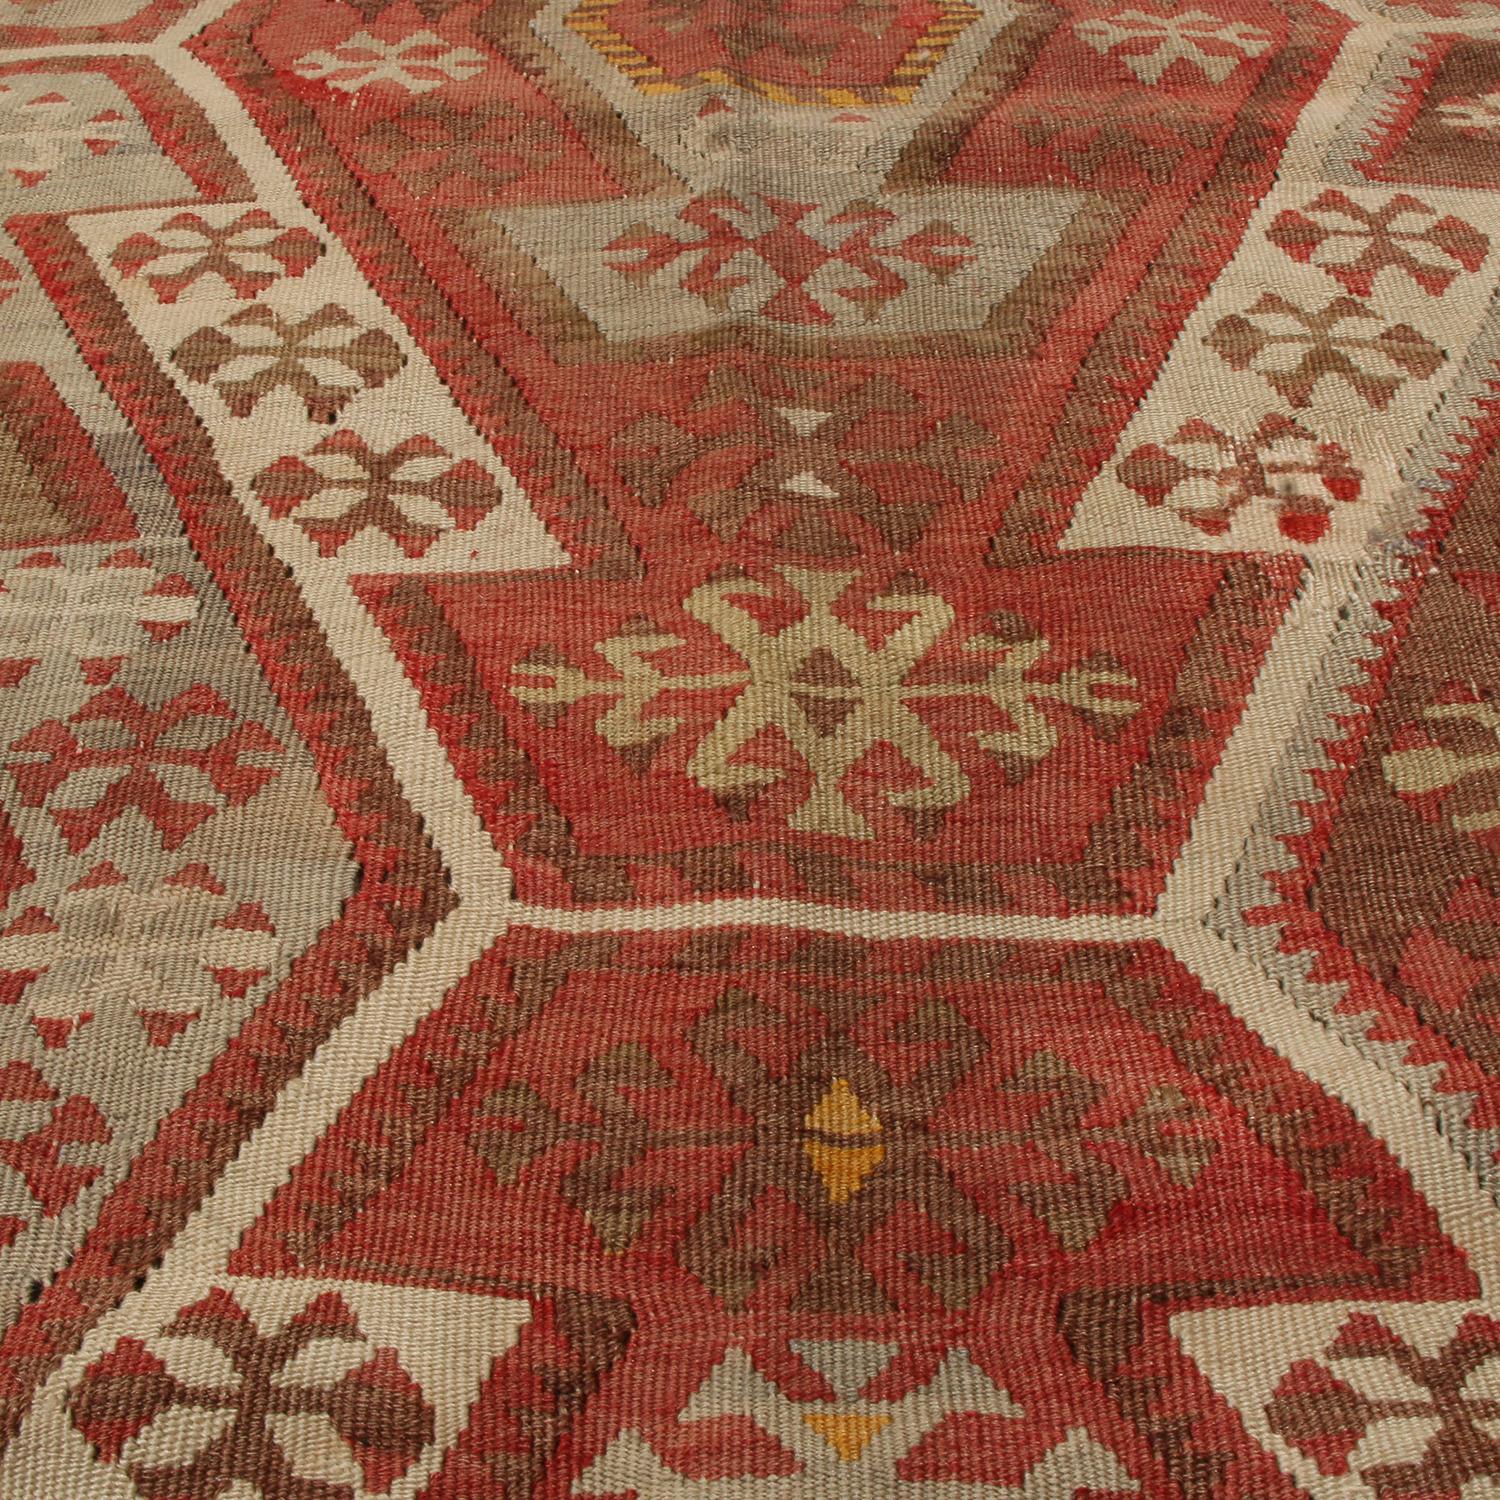 Vintage Kayseri Russet Red and Beige Wool Kilim Rug by Rug & Kilim In Excellent Condition For Sale In Long Island City, NY